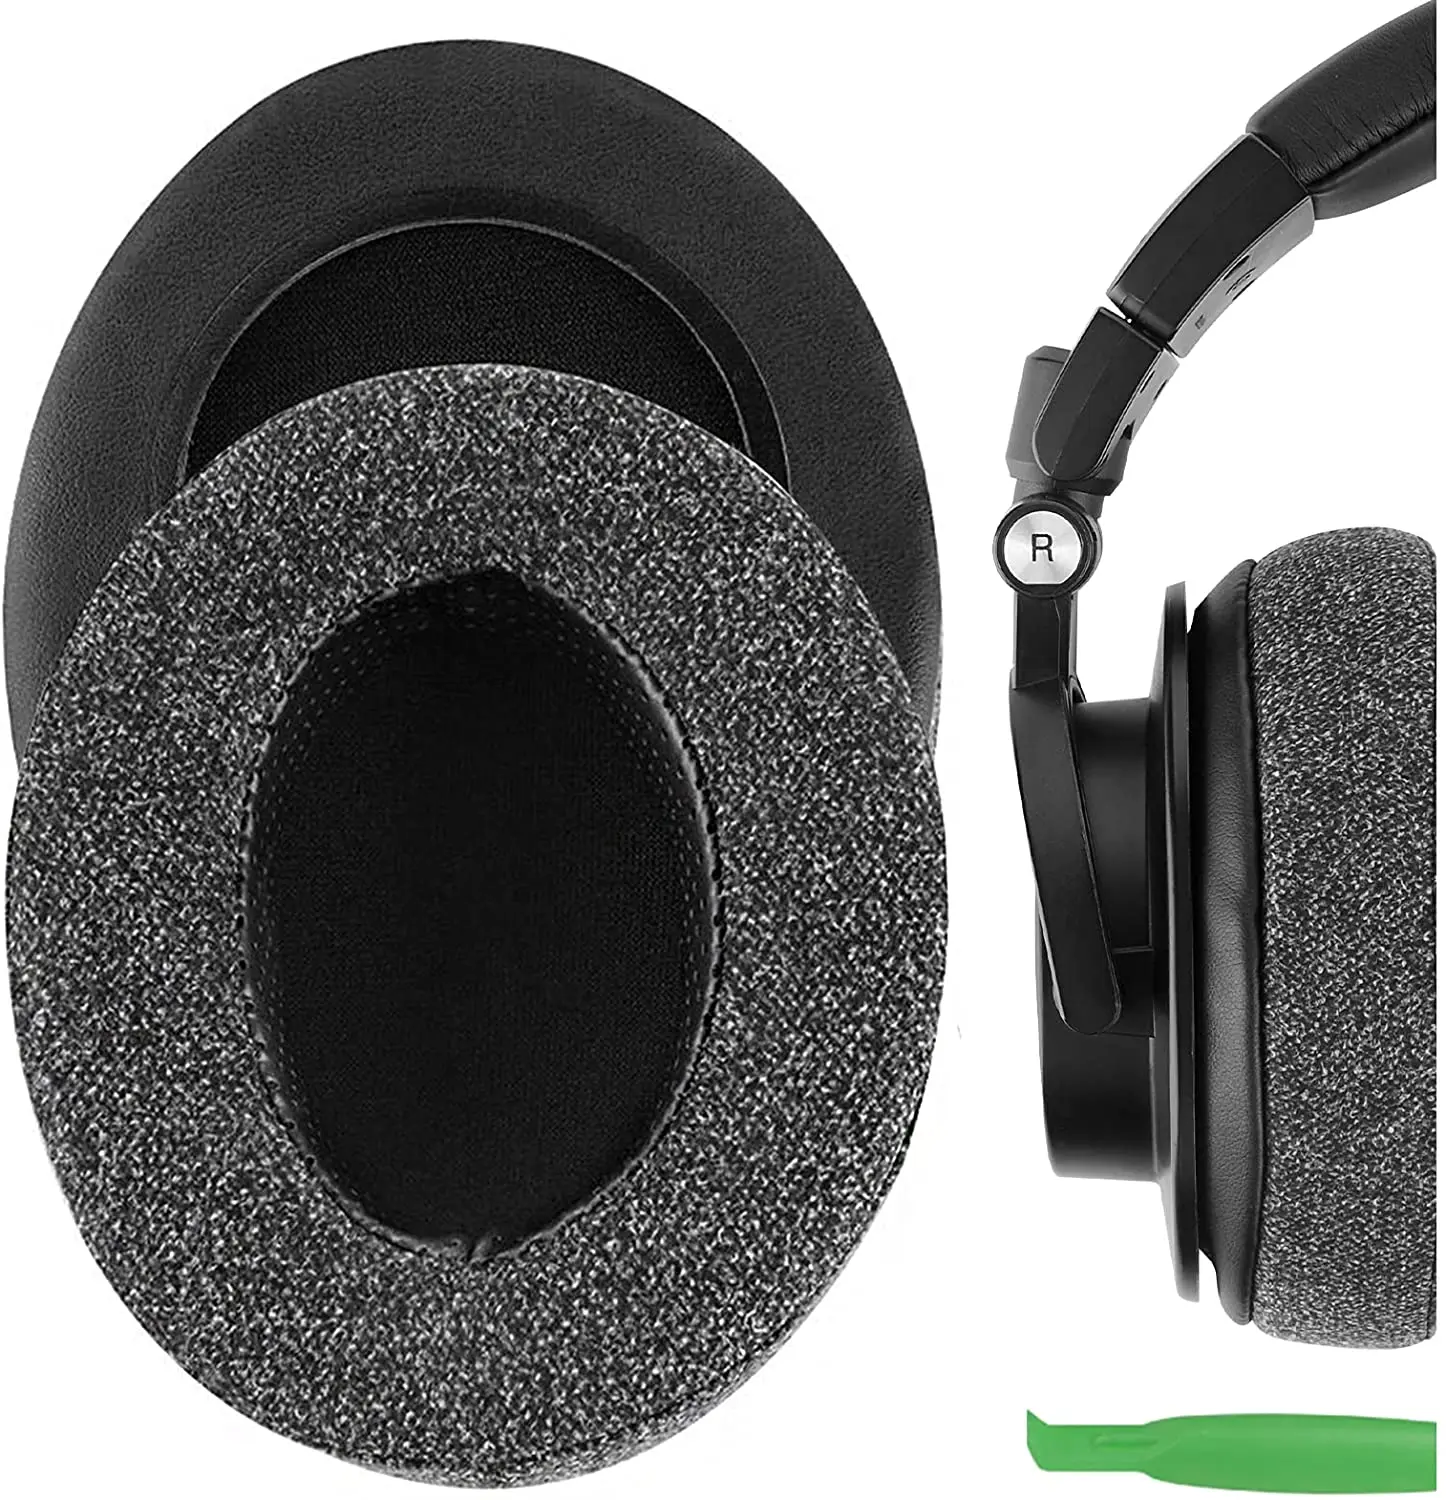 

Comfort Linen Replacement Ear Pads for ATH-M50XBT ATH-M50X M40X M30X M20X M10X ATH-ANC9 Headphones Earpads